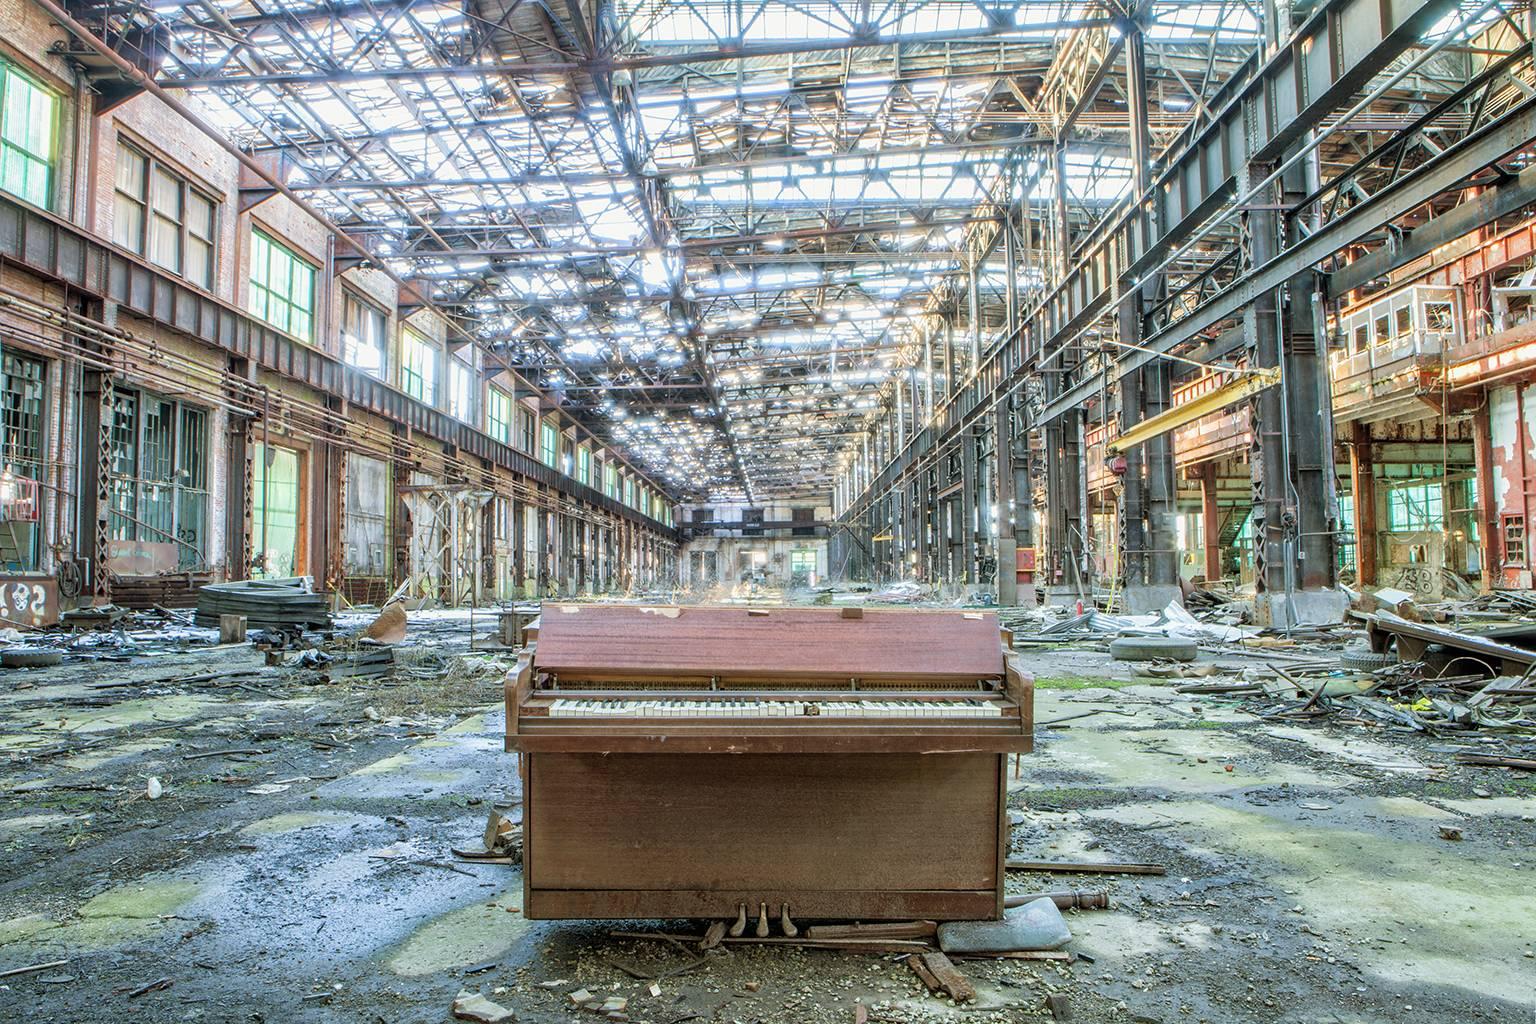 Rebecca Skinner Color Photograph - "The Piano", industrial, abandoned, landscape, blue, green, color photograph